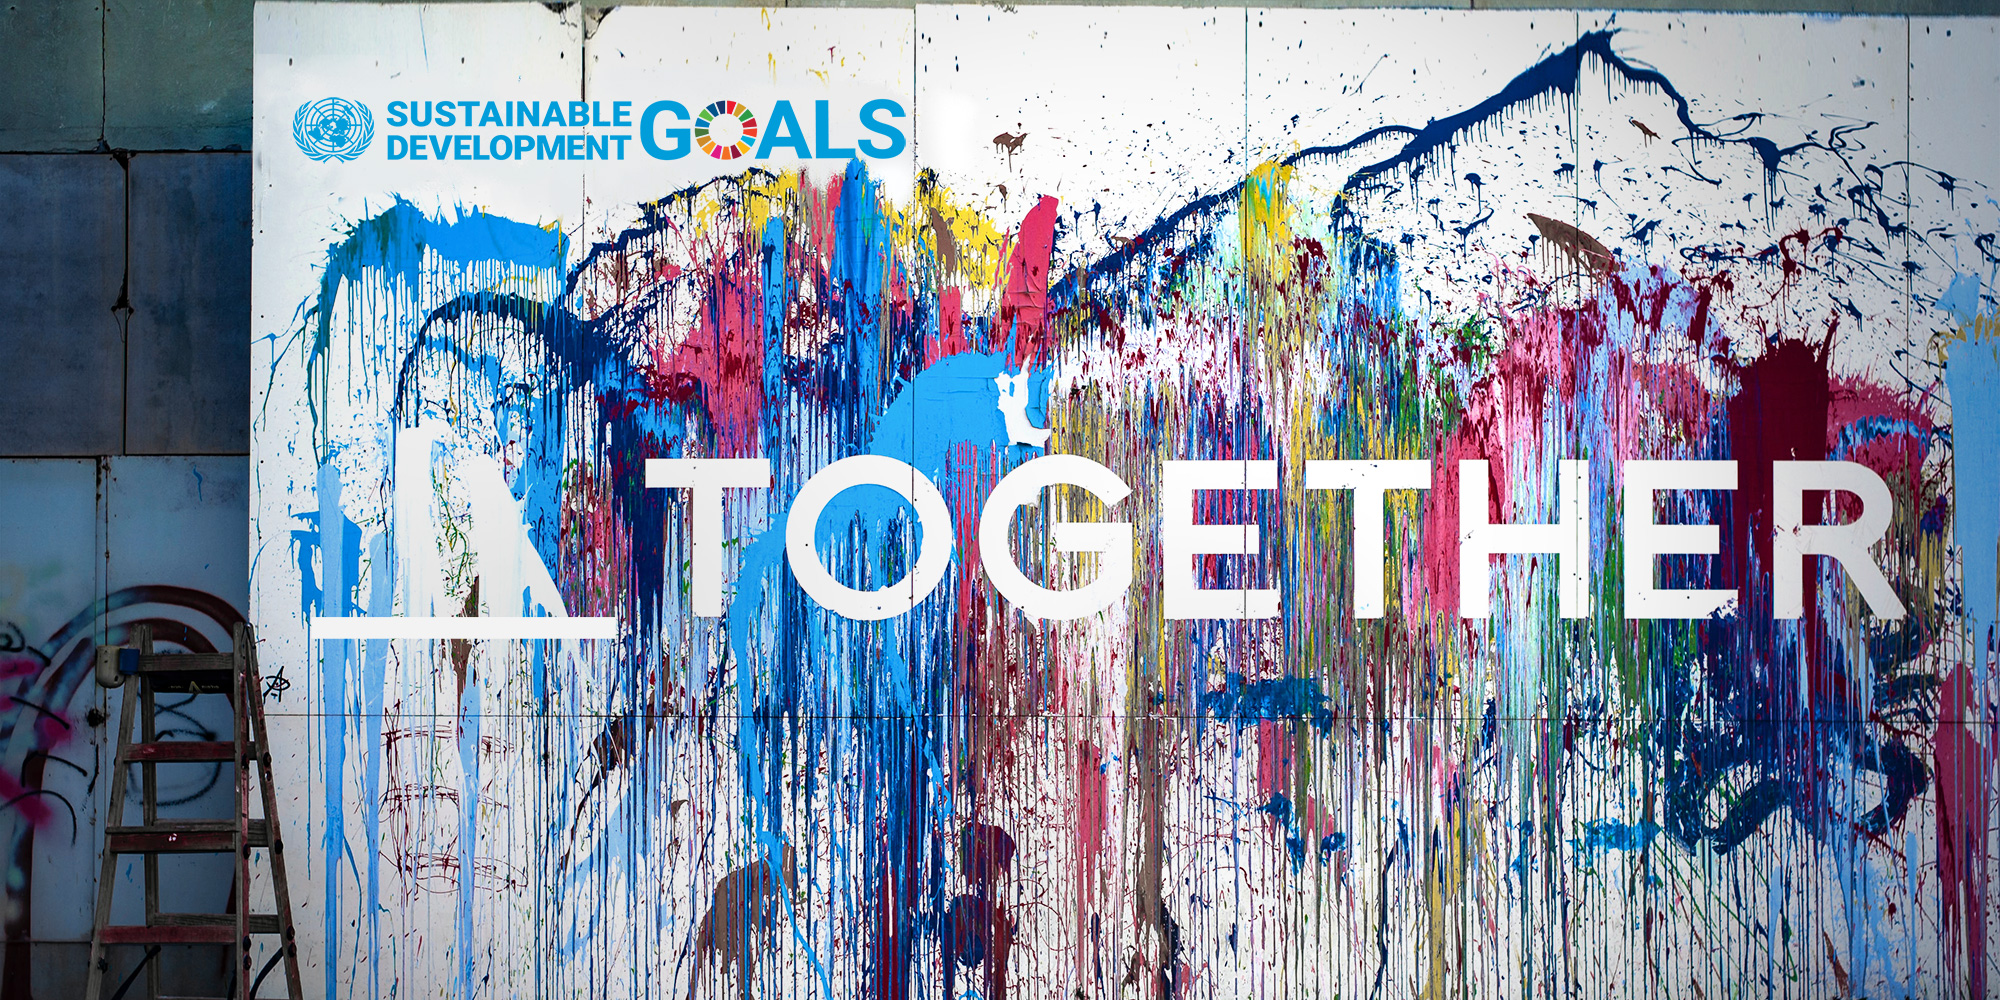 Design of colourful paint on a white wall, with the SDG logo, and TOGETHER written in white and all caps